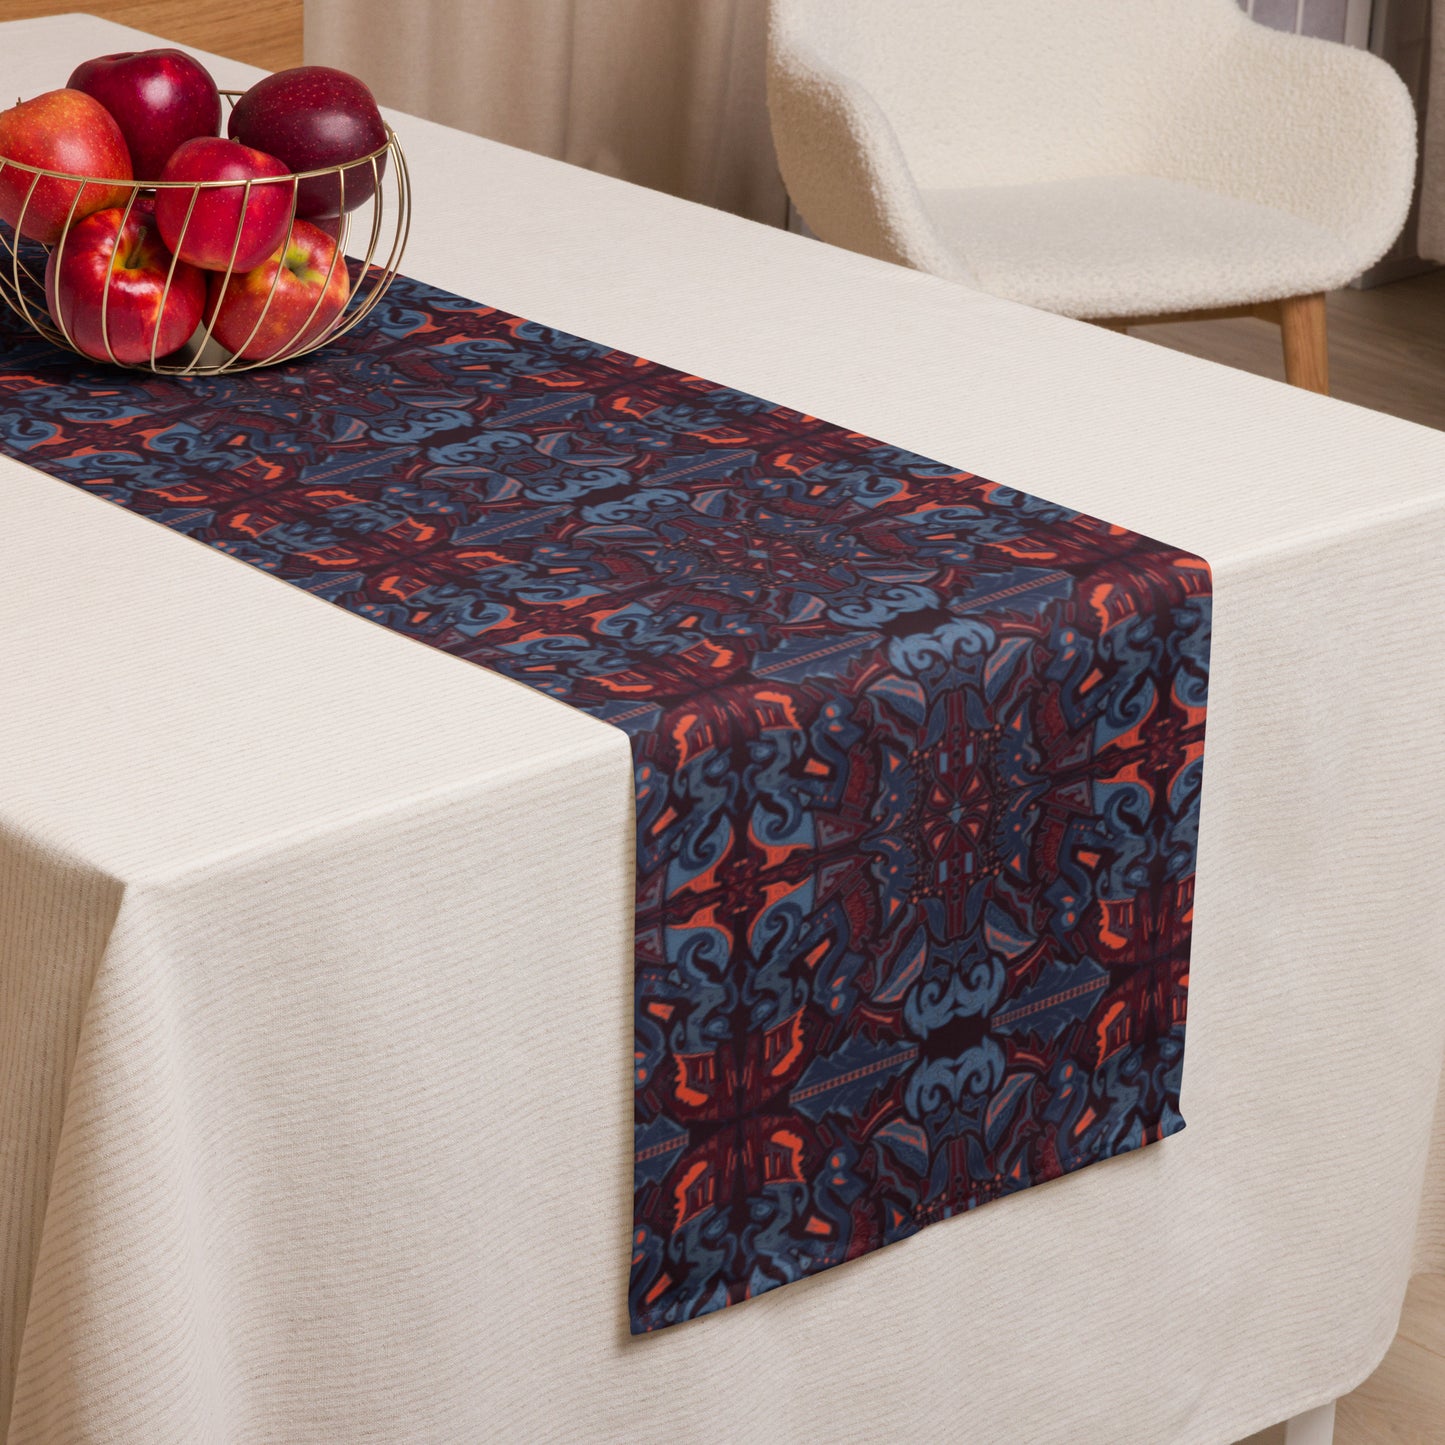 Many Paths Table runner